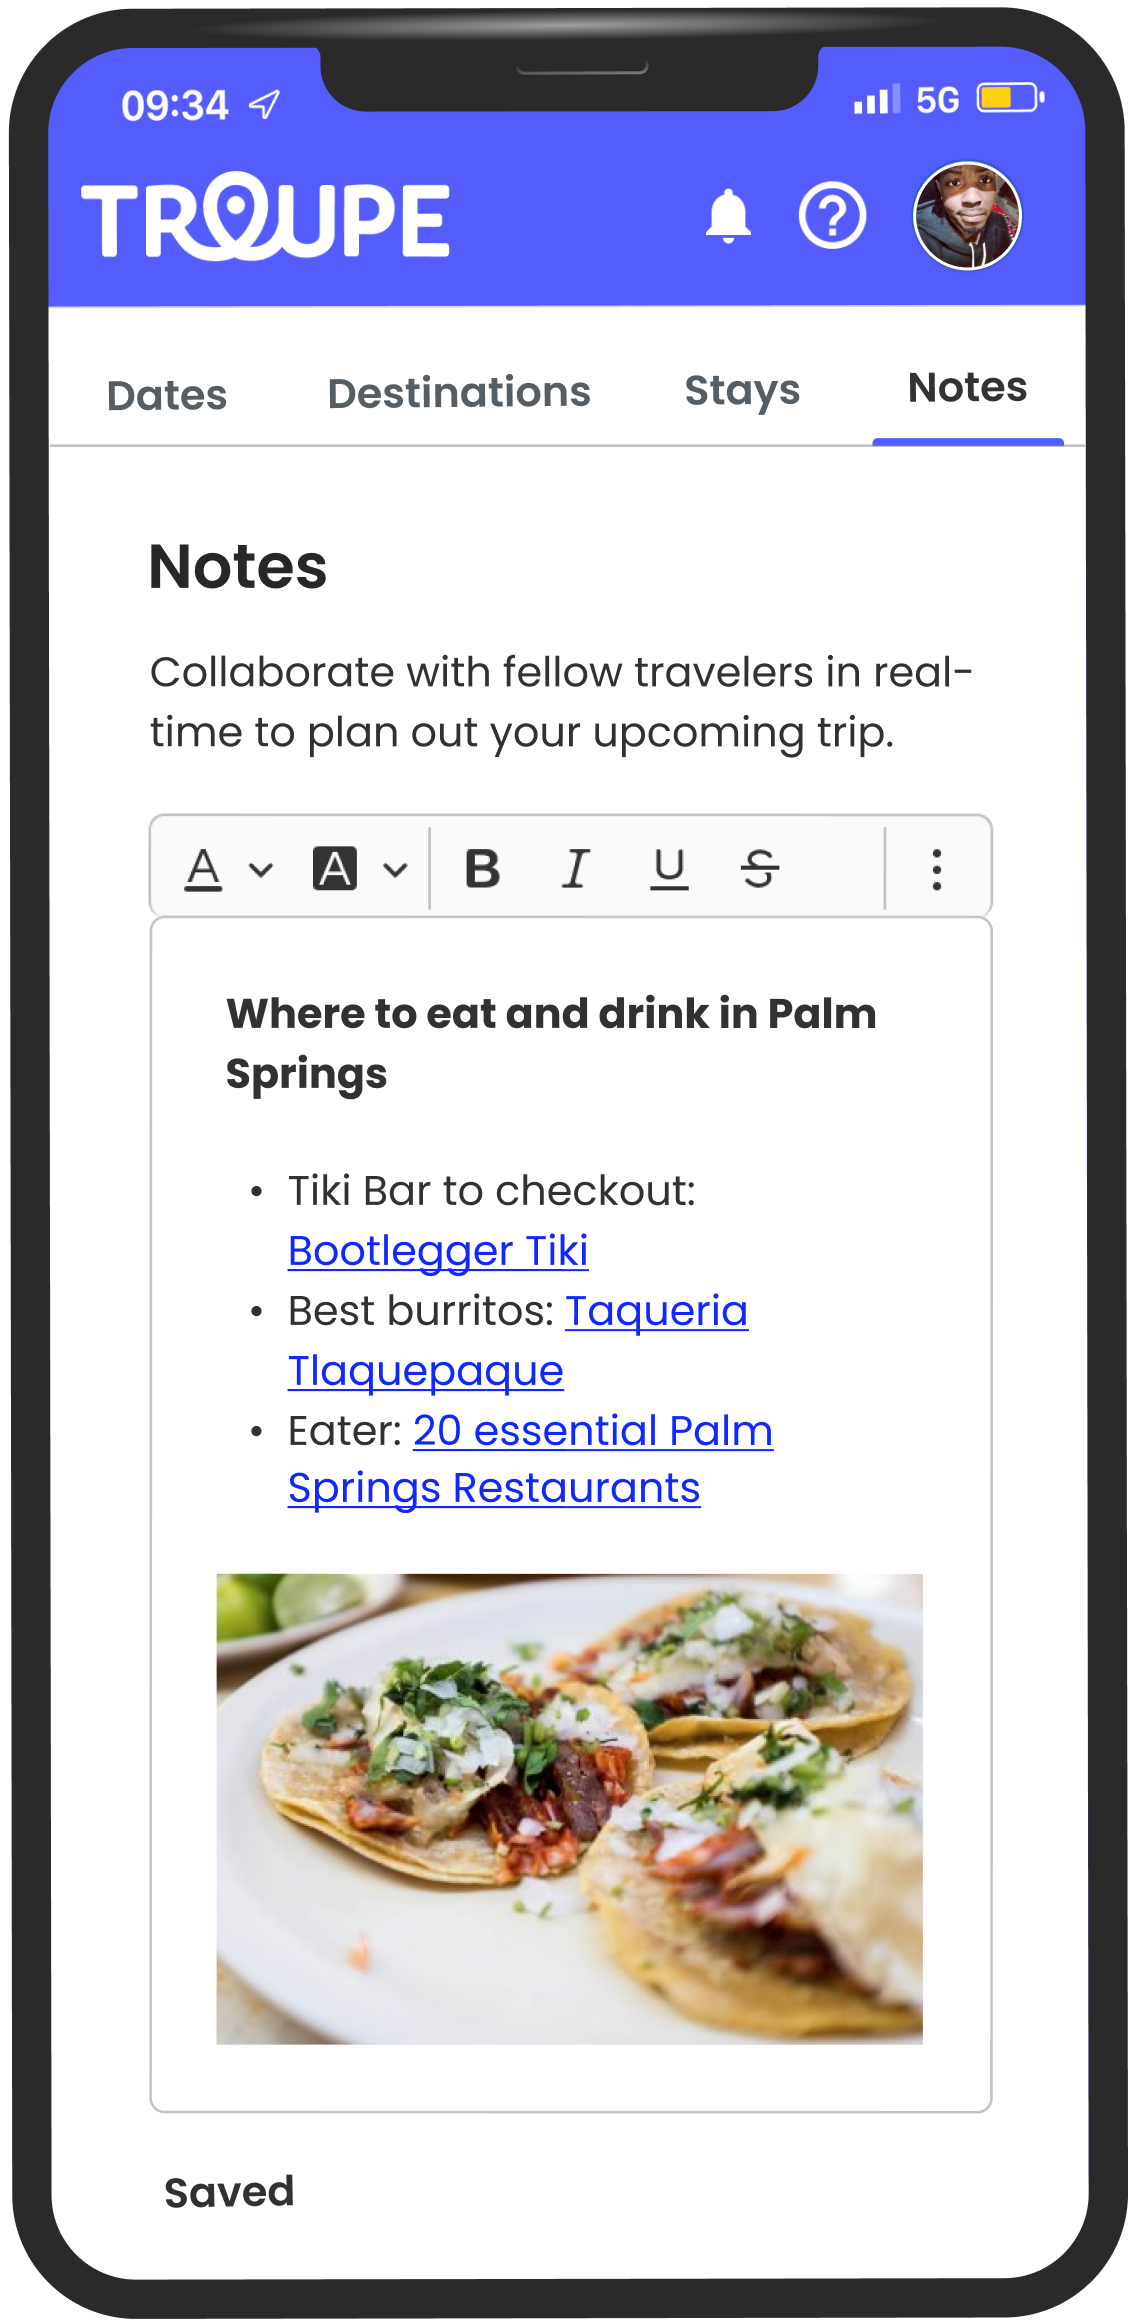 An iphone showing the Troupe UI with a screen that shows a collaborative note with links to suggested restaurants and ideas for places to eat on a group trip